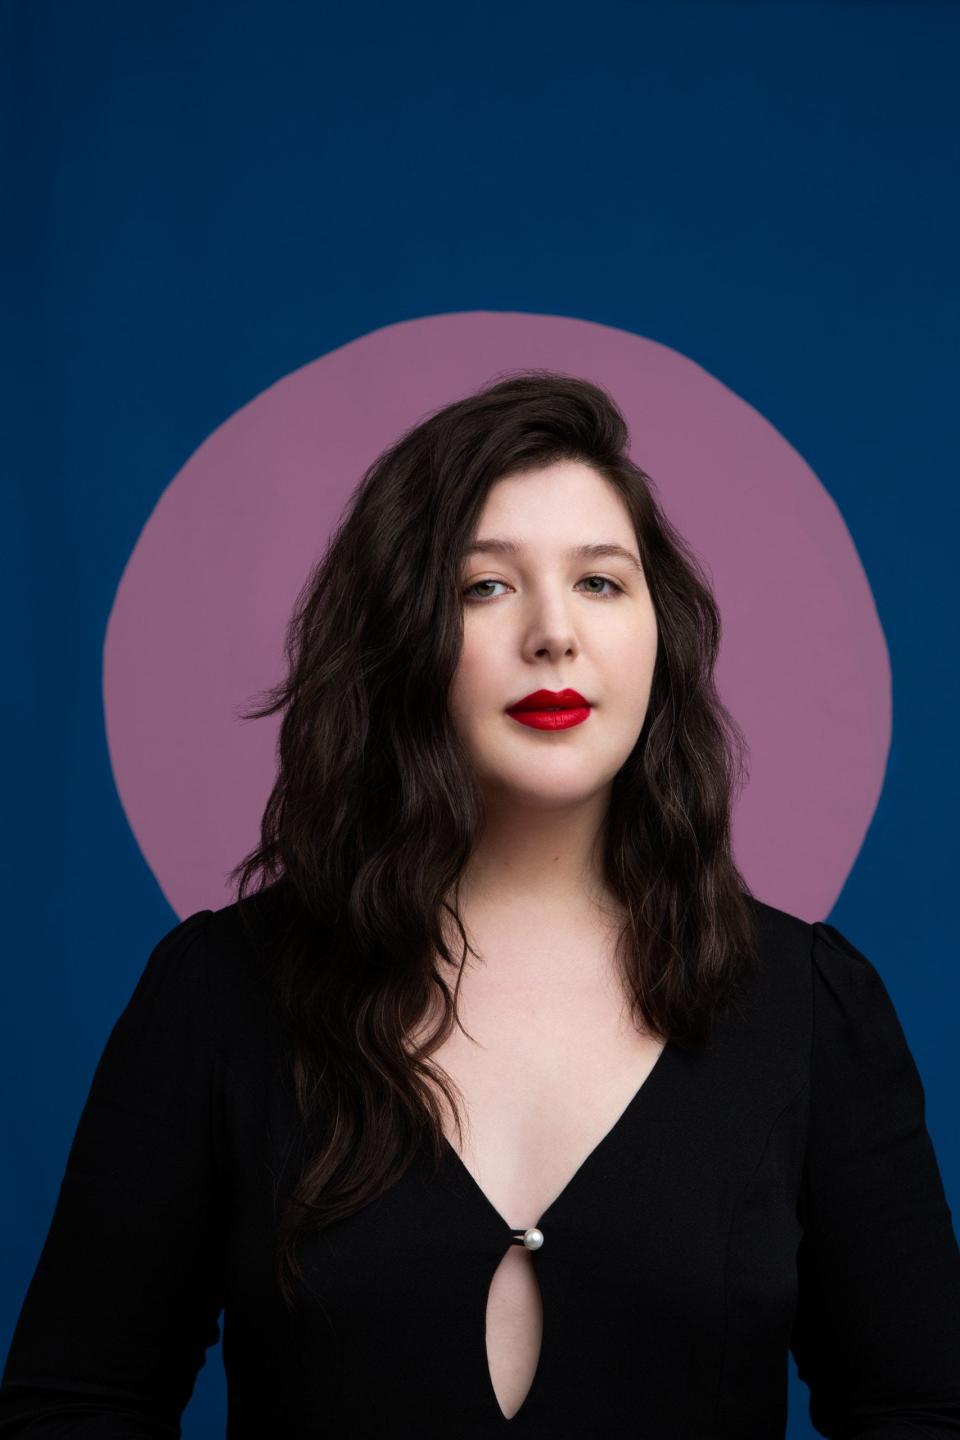 Lucy Dacus will give a show presented by FSU's Club Downunder for FSU students at The Moon on Monday, Oct. 10, 2022.